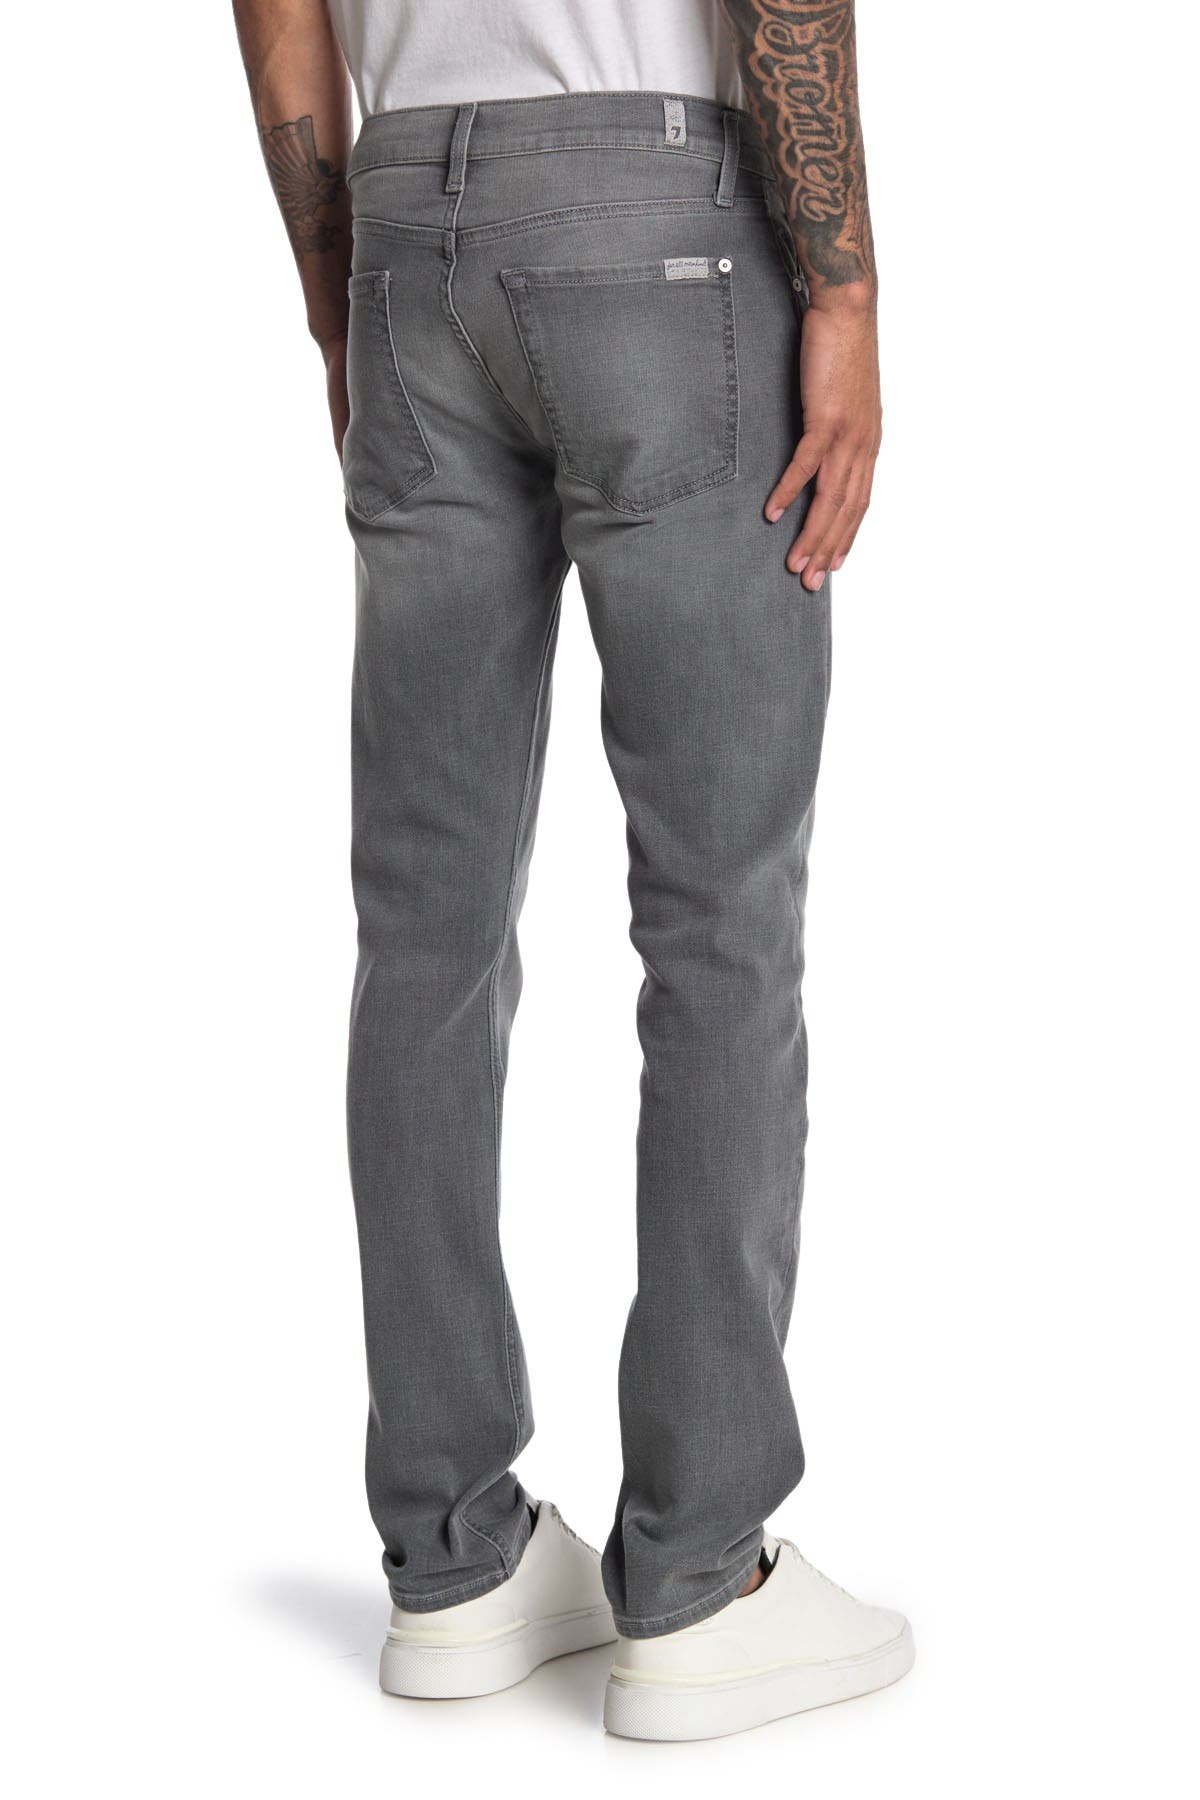 7 For All Mankind Paxtyn Clean Pant In Oxford3